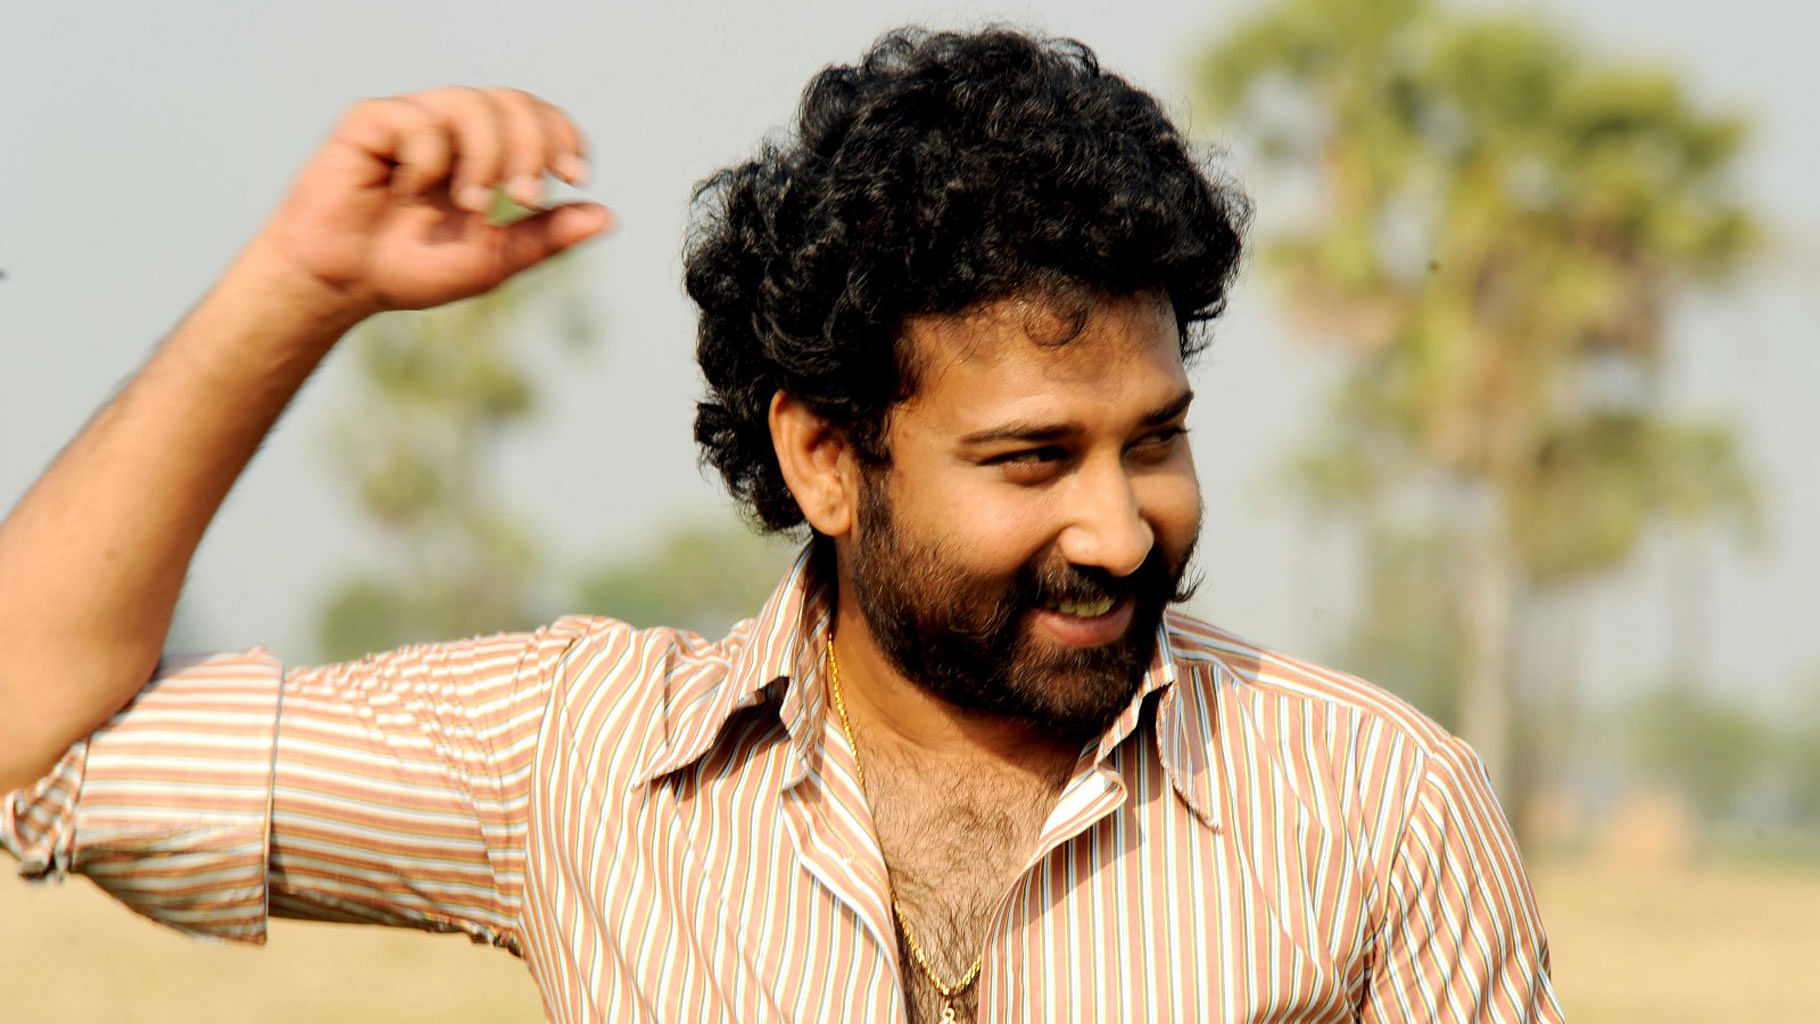 Siva Balaji wins Season 1 of Bigg Boss Telugu. He aims to spend a few days crying it out with his wife, before deciding on what to do next.